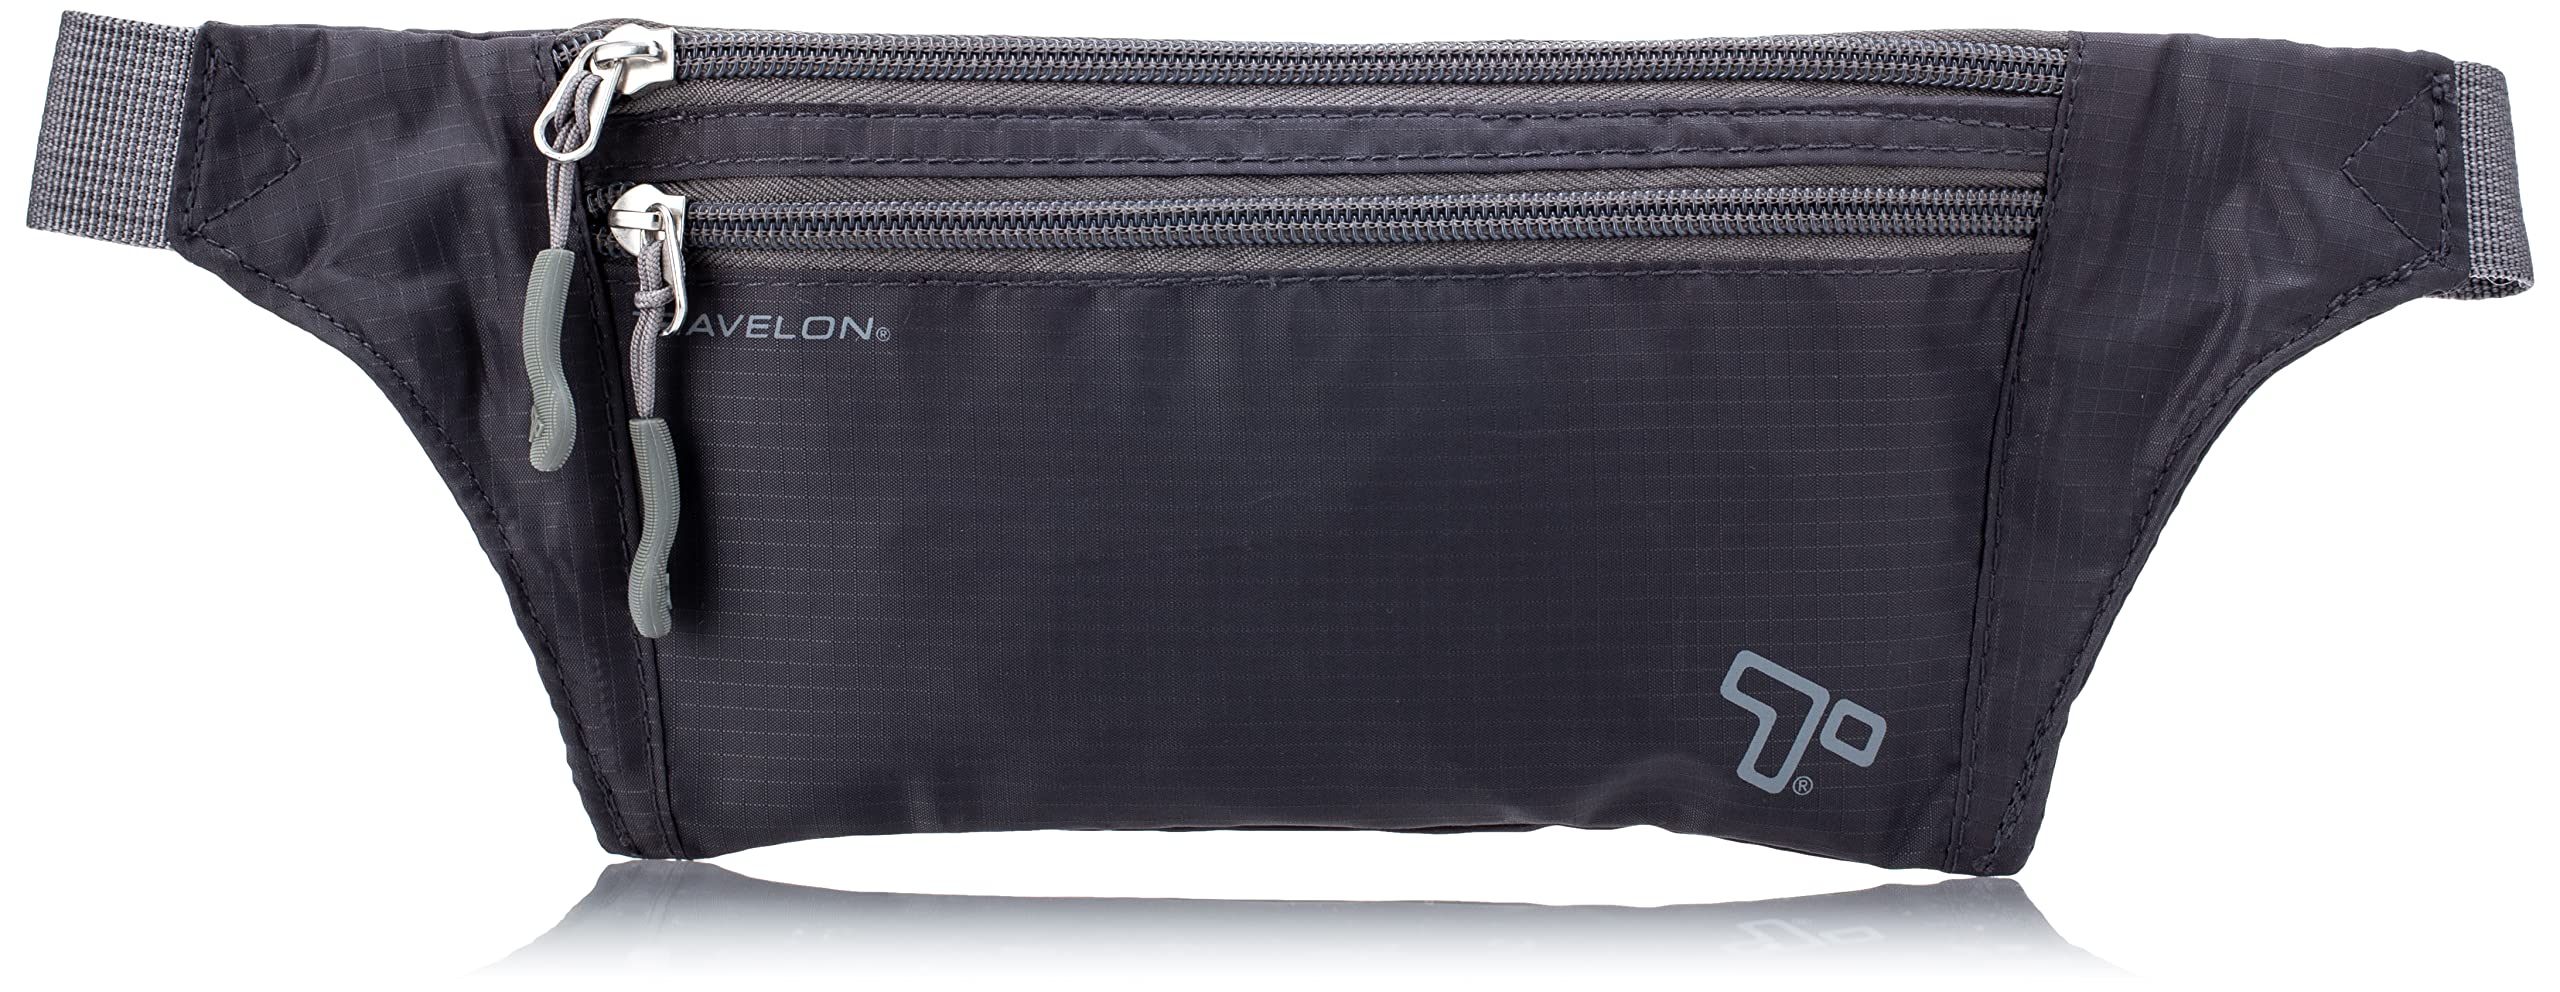 Travelon Double Zip Waist Pack, Charcoal, One Size